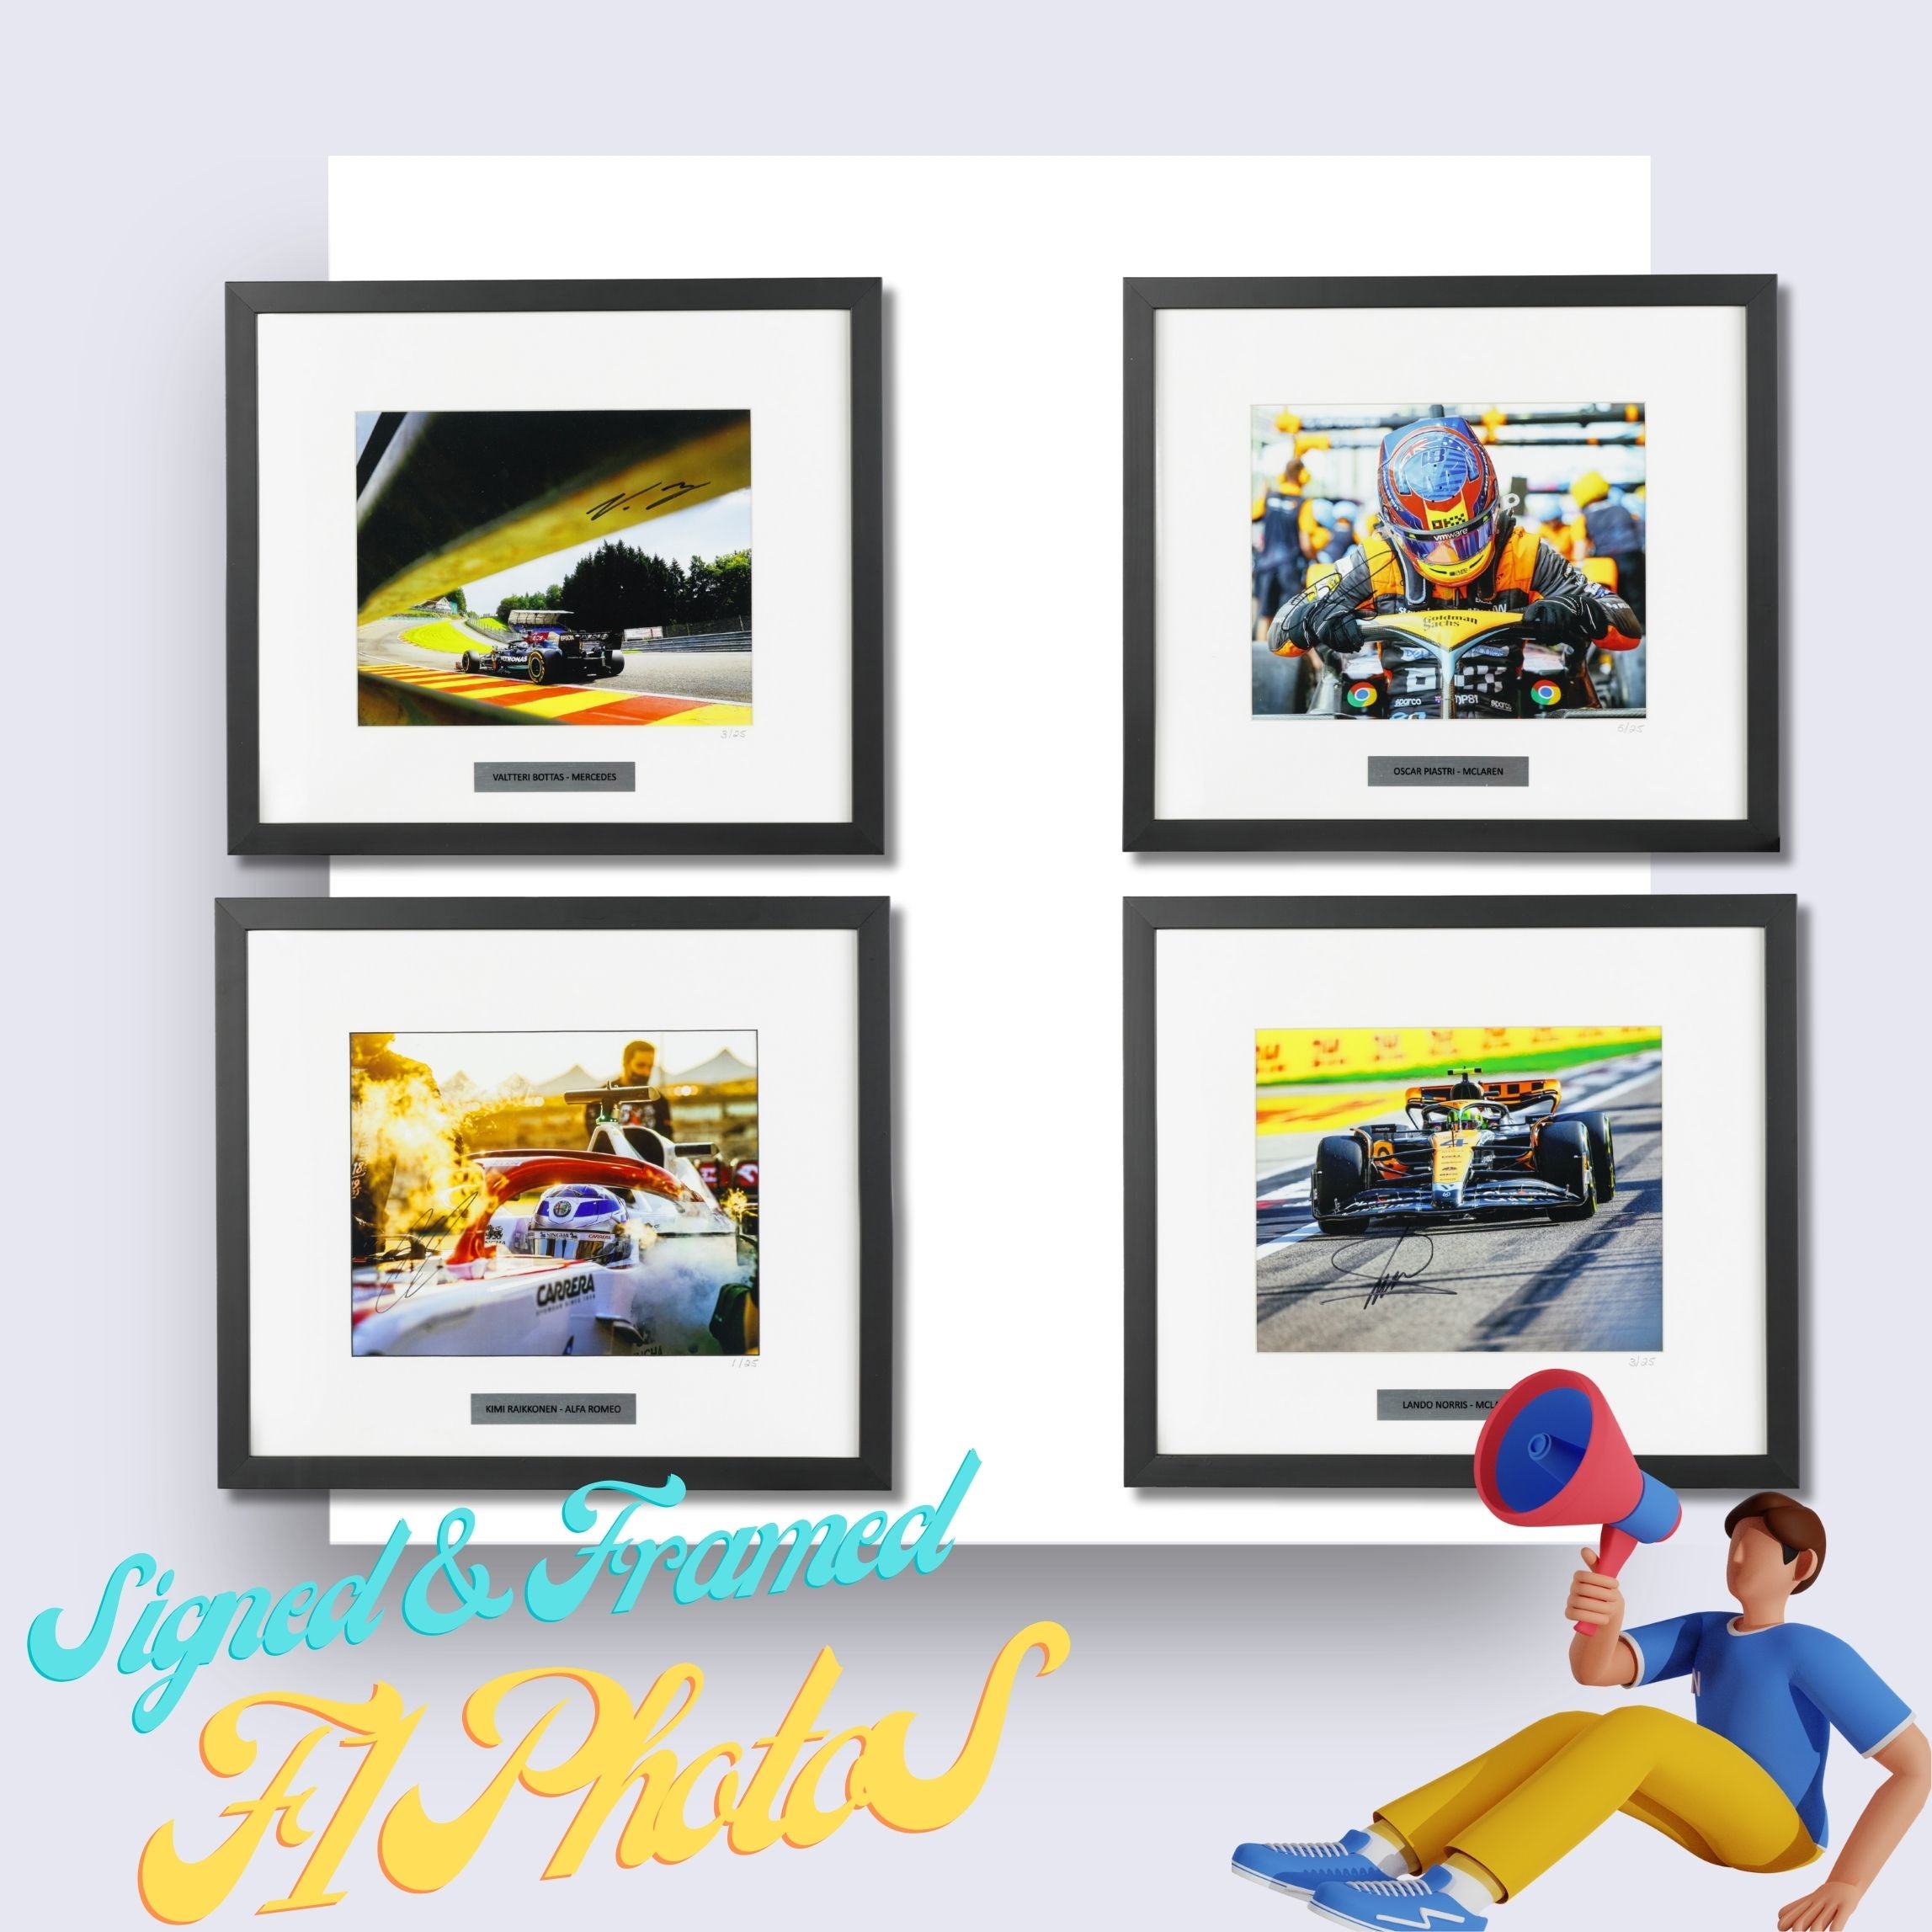 Framed & Signed F1 Photos Are In Stock!